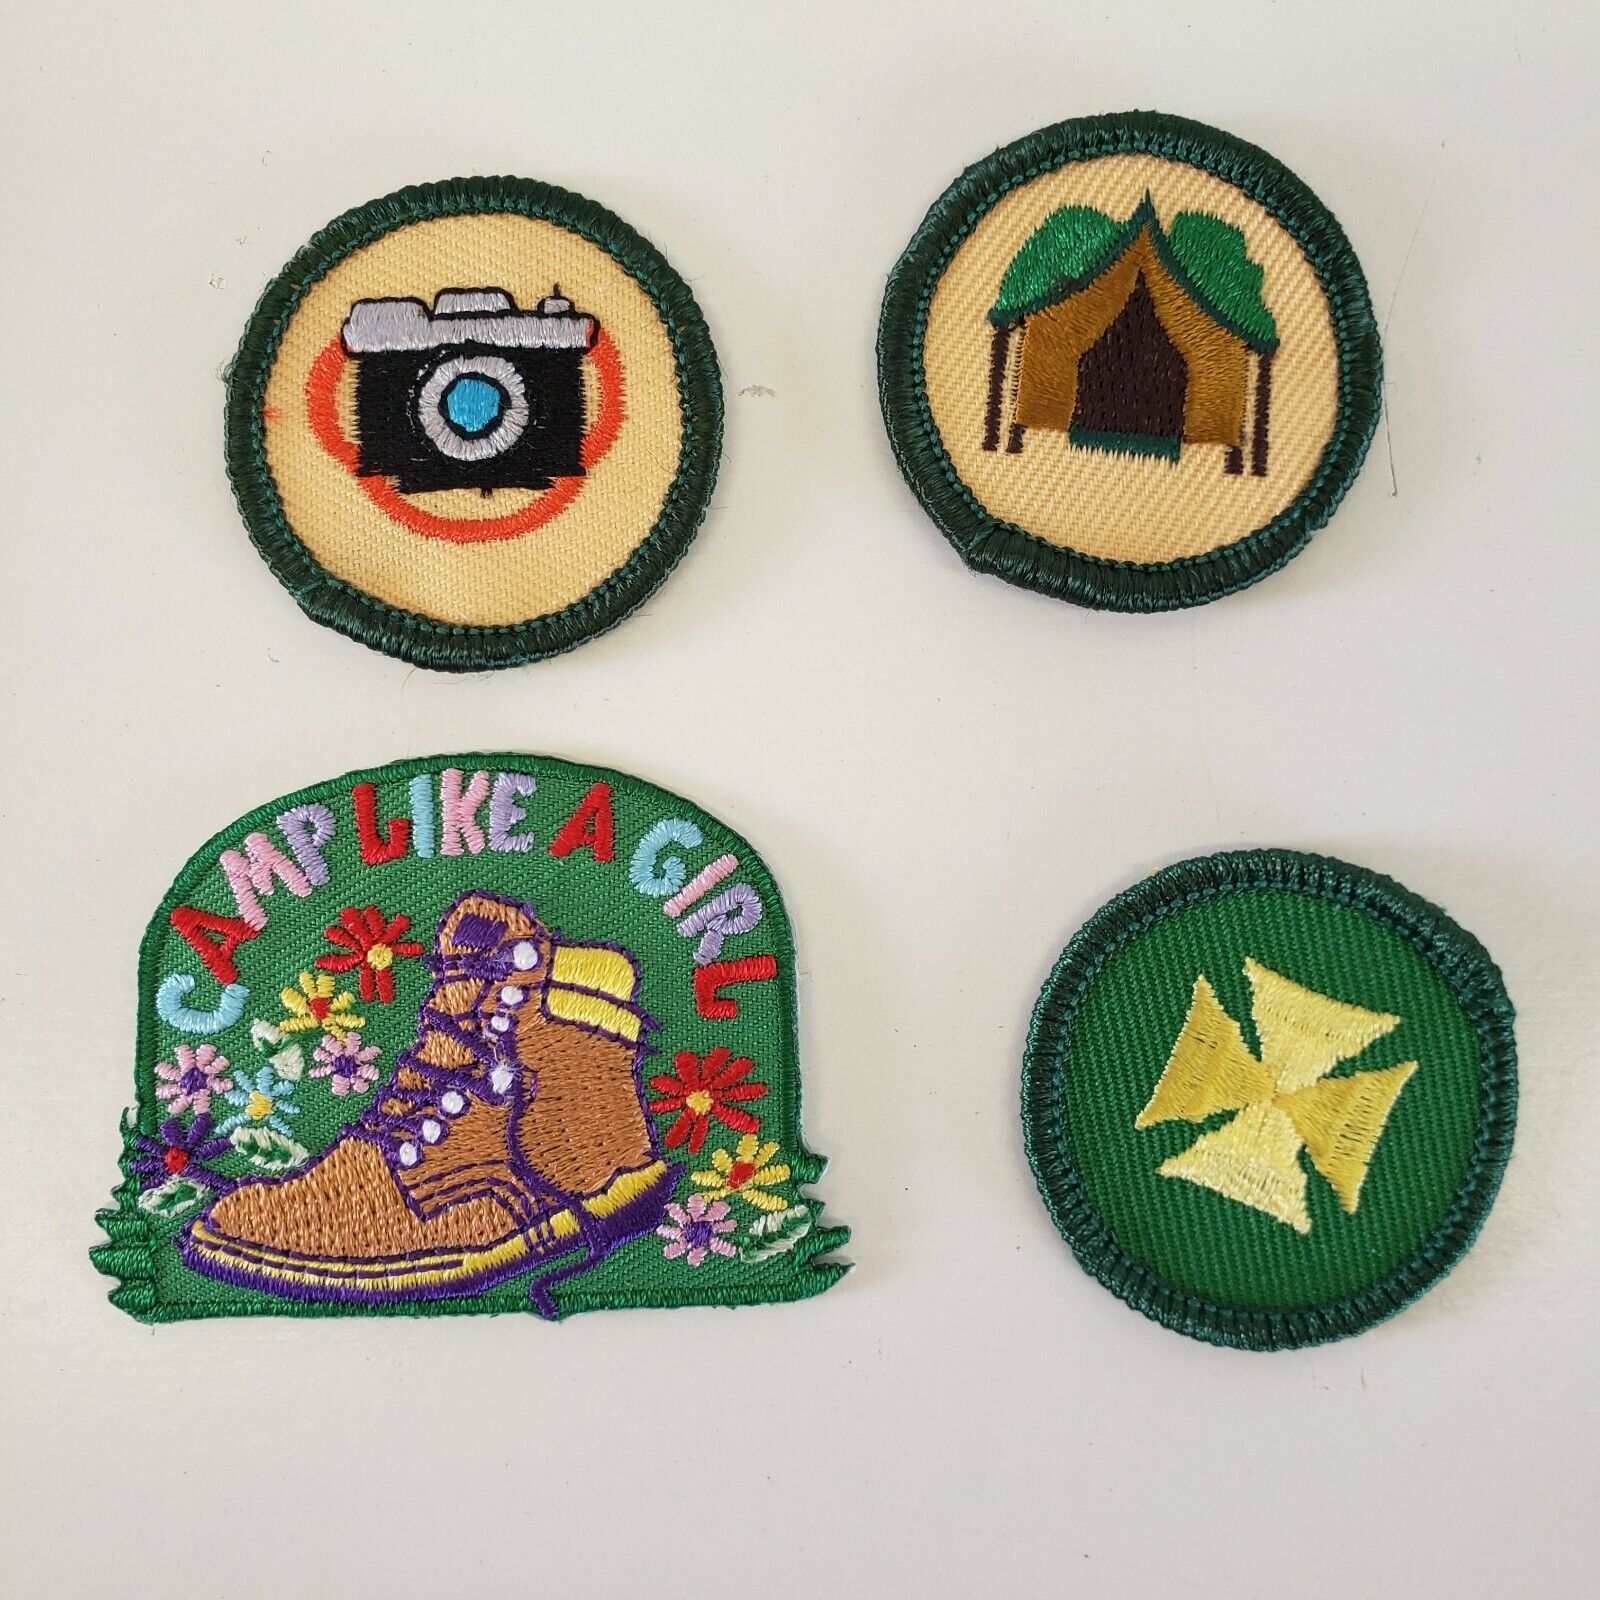 Lot of 4 Girl Scout Badges Patches; Vintage and Modern Camping Themed Без бренда